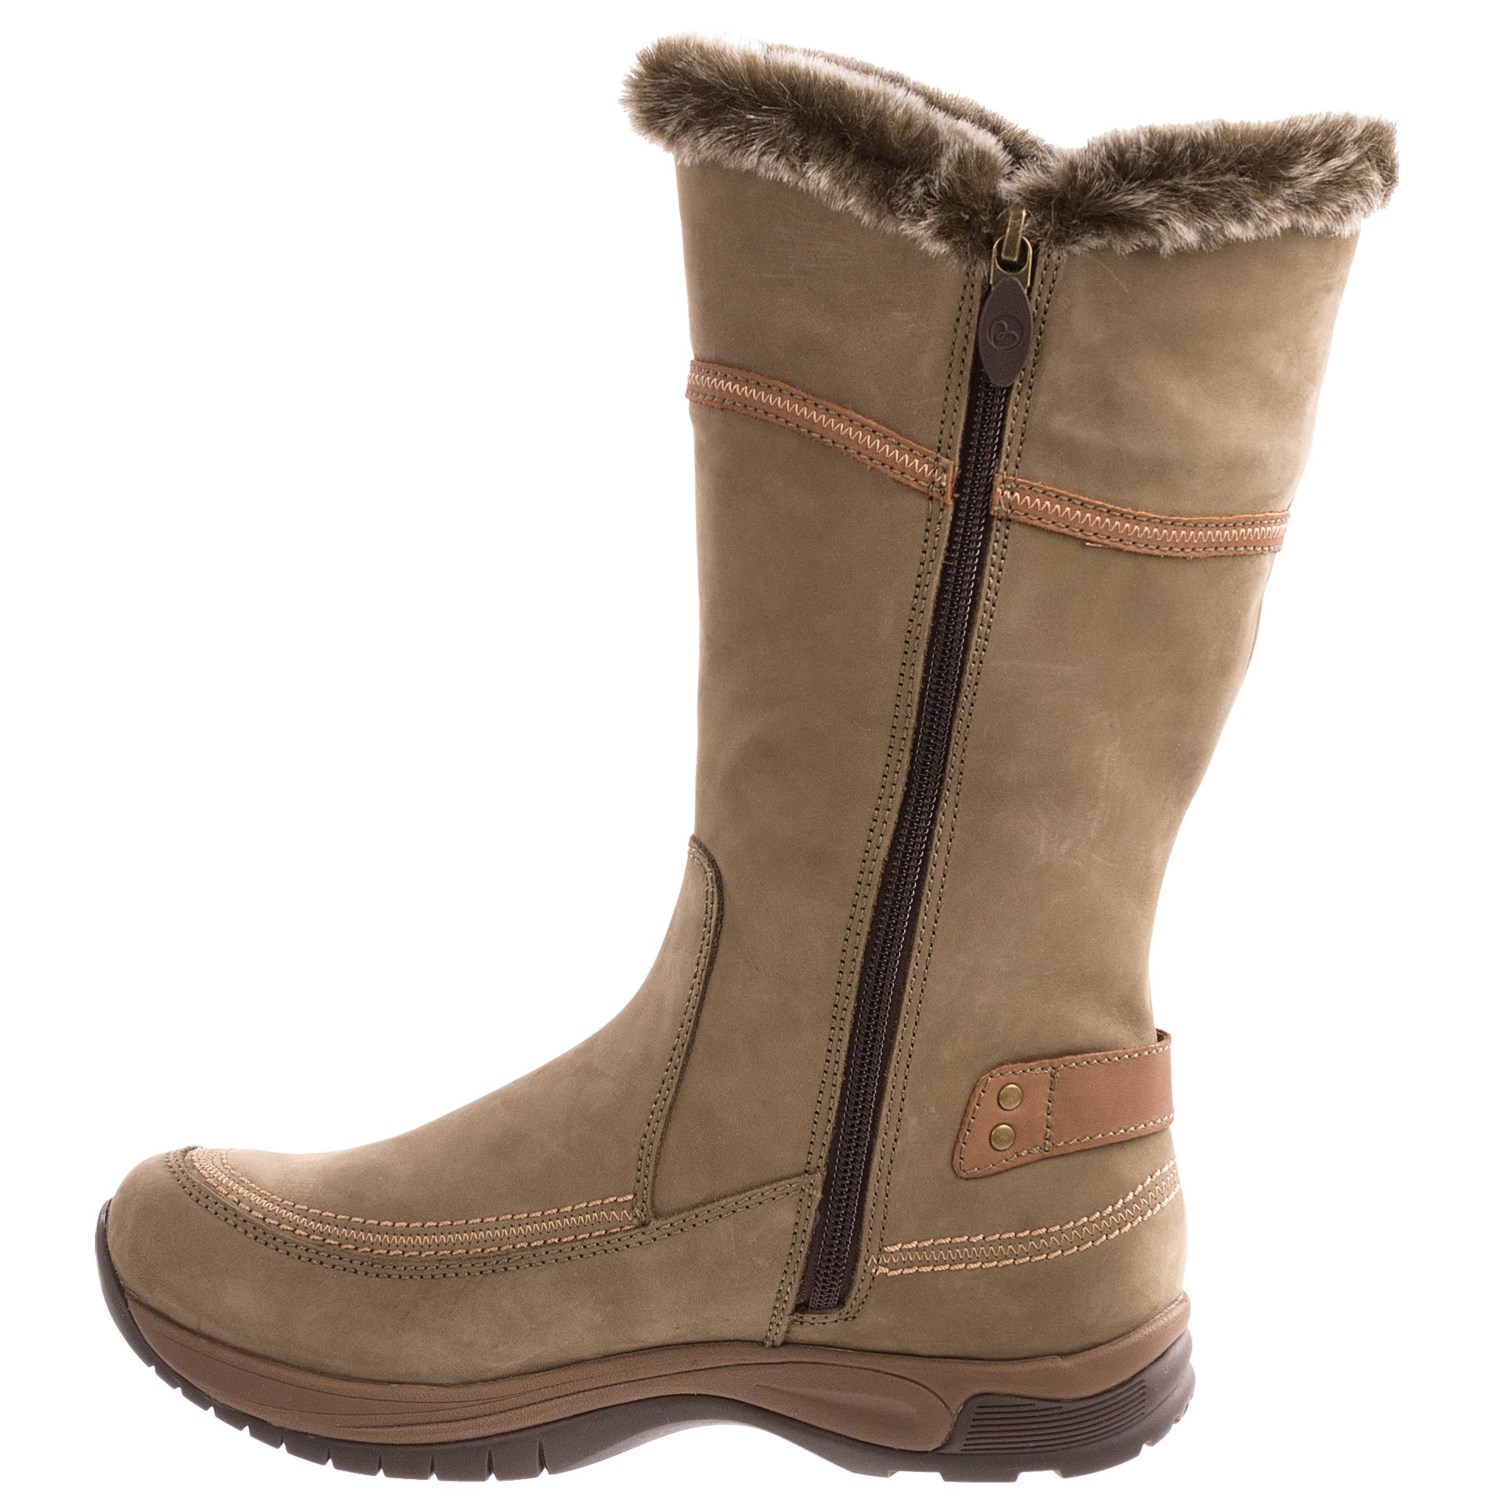 Blondo Jaimie Boots (For Women) 7407G - Save 32%